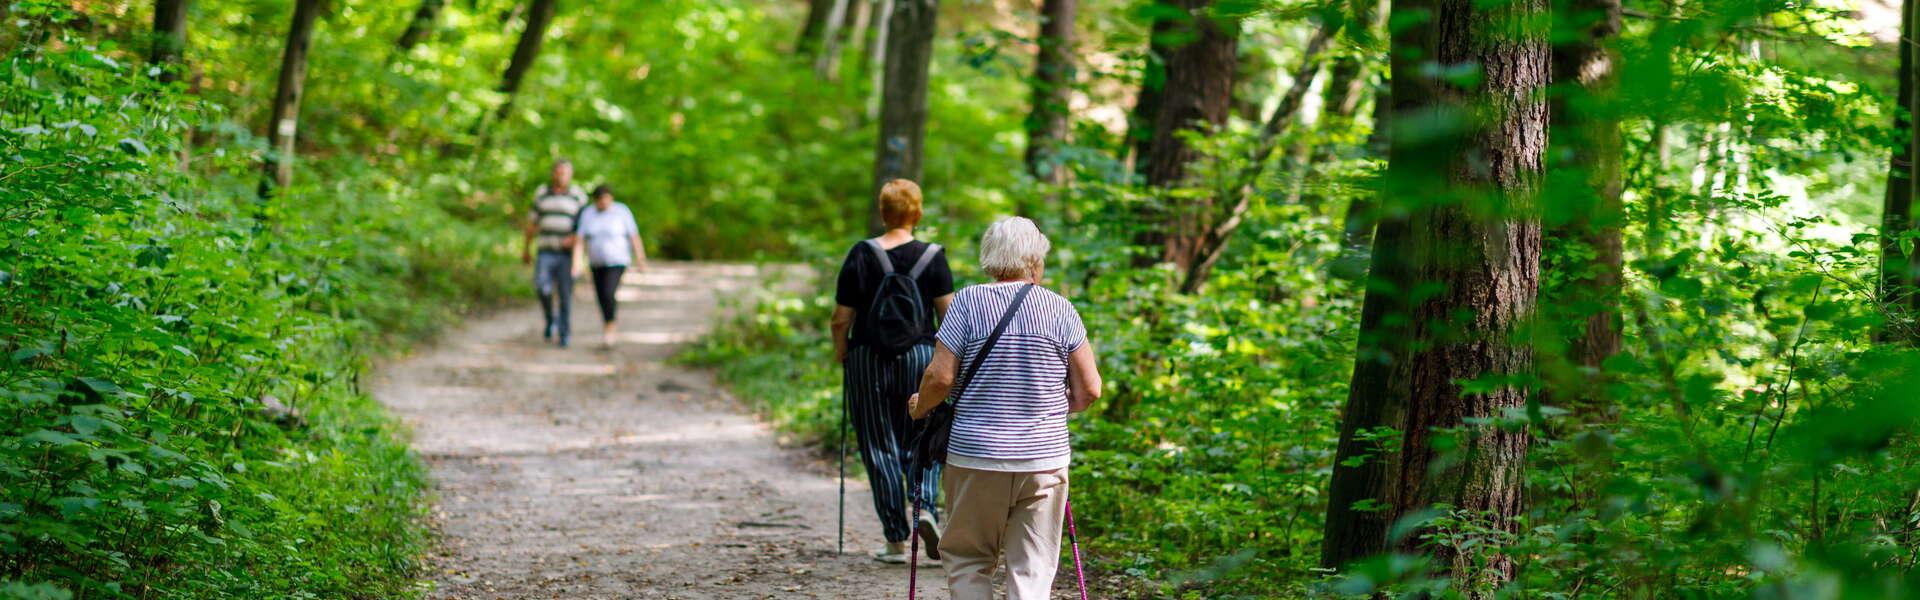 View of a group of elderly people walking on a forest path in the Racławka Valley Nature Reserve. Two women in the foreground hold ‘kilki’ in their hands. They’re standing amidst a gorgeous forest.